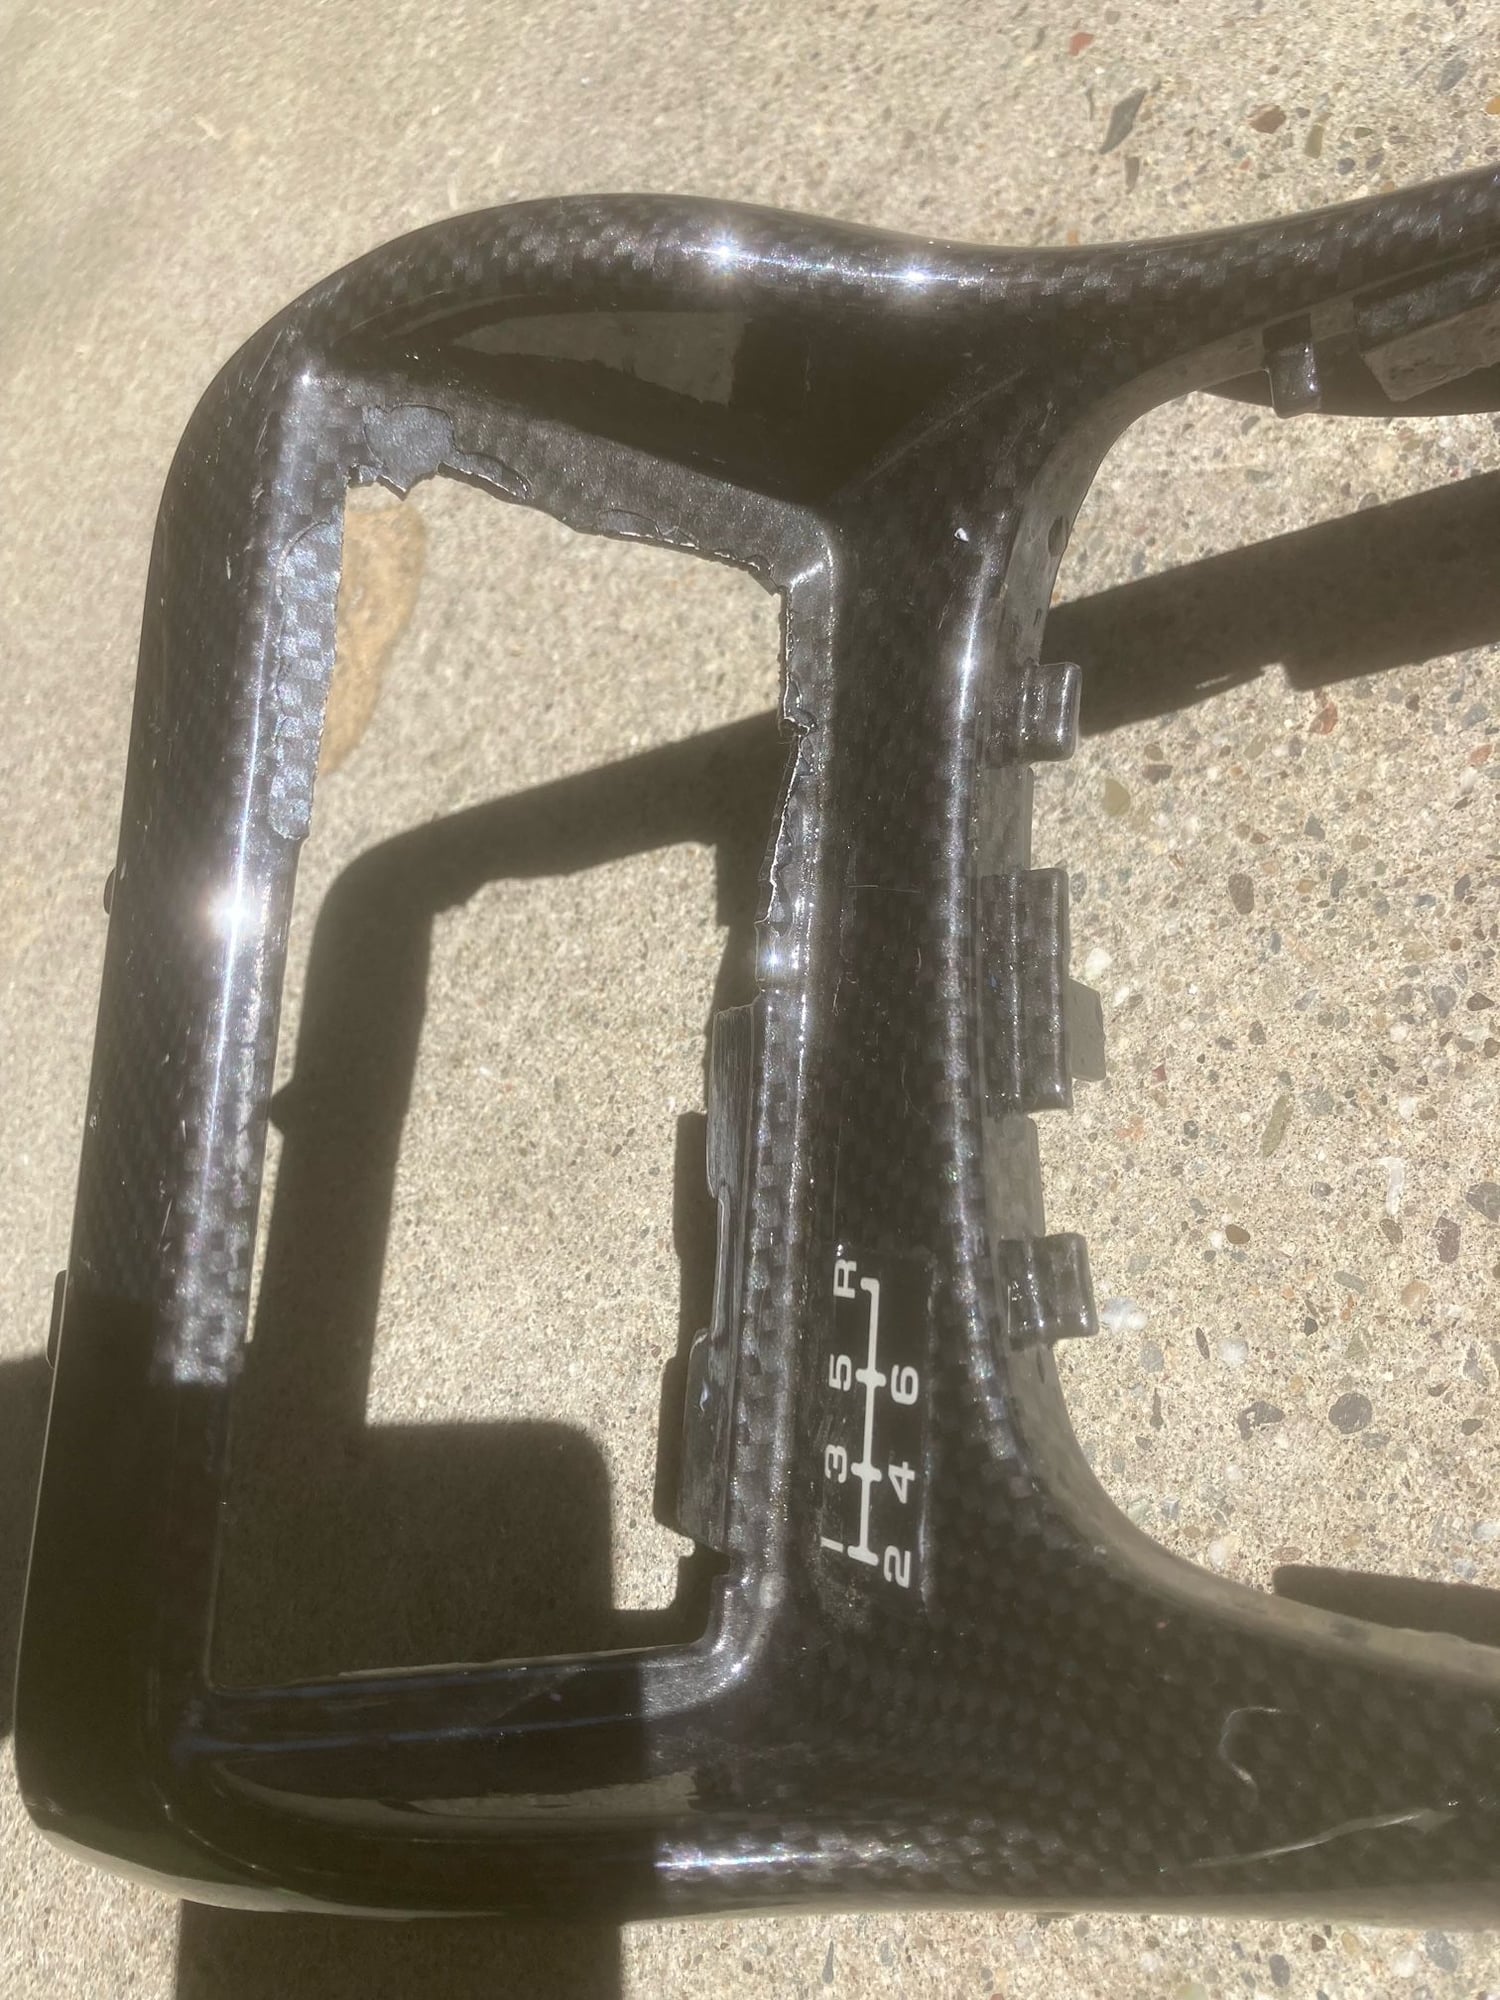 Interior/Upholstery - Firebird Hydro dipped Carbon Fiber Center Console and matching door swtich trim - Used - 1993 to 2002 Pontiac Firebird - Walnut Creek, CA 94597, United States